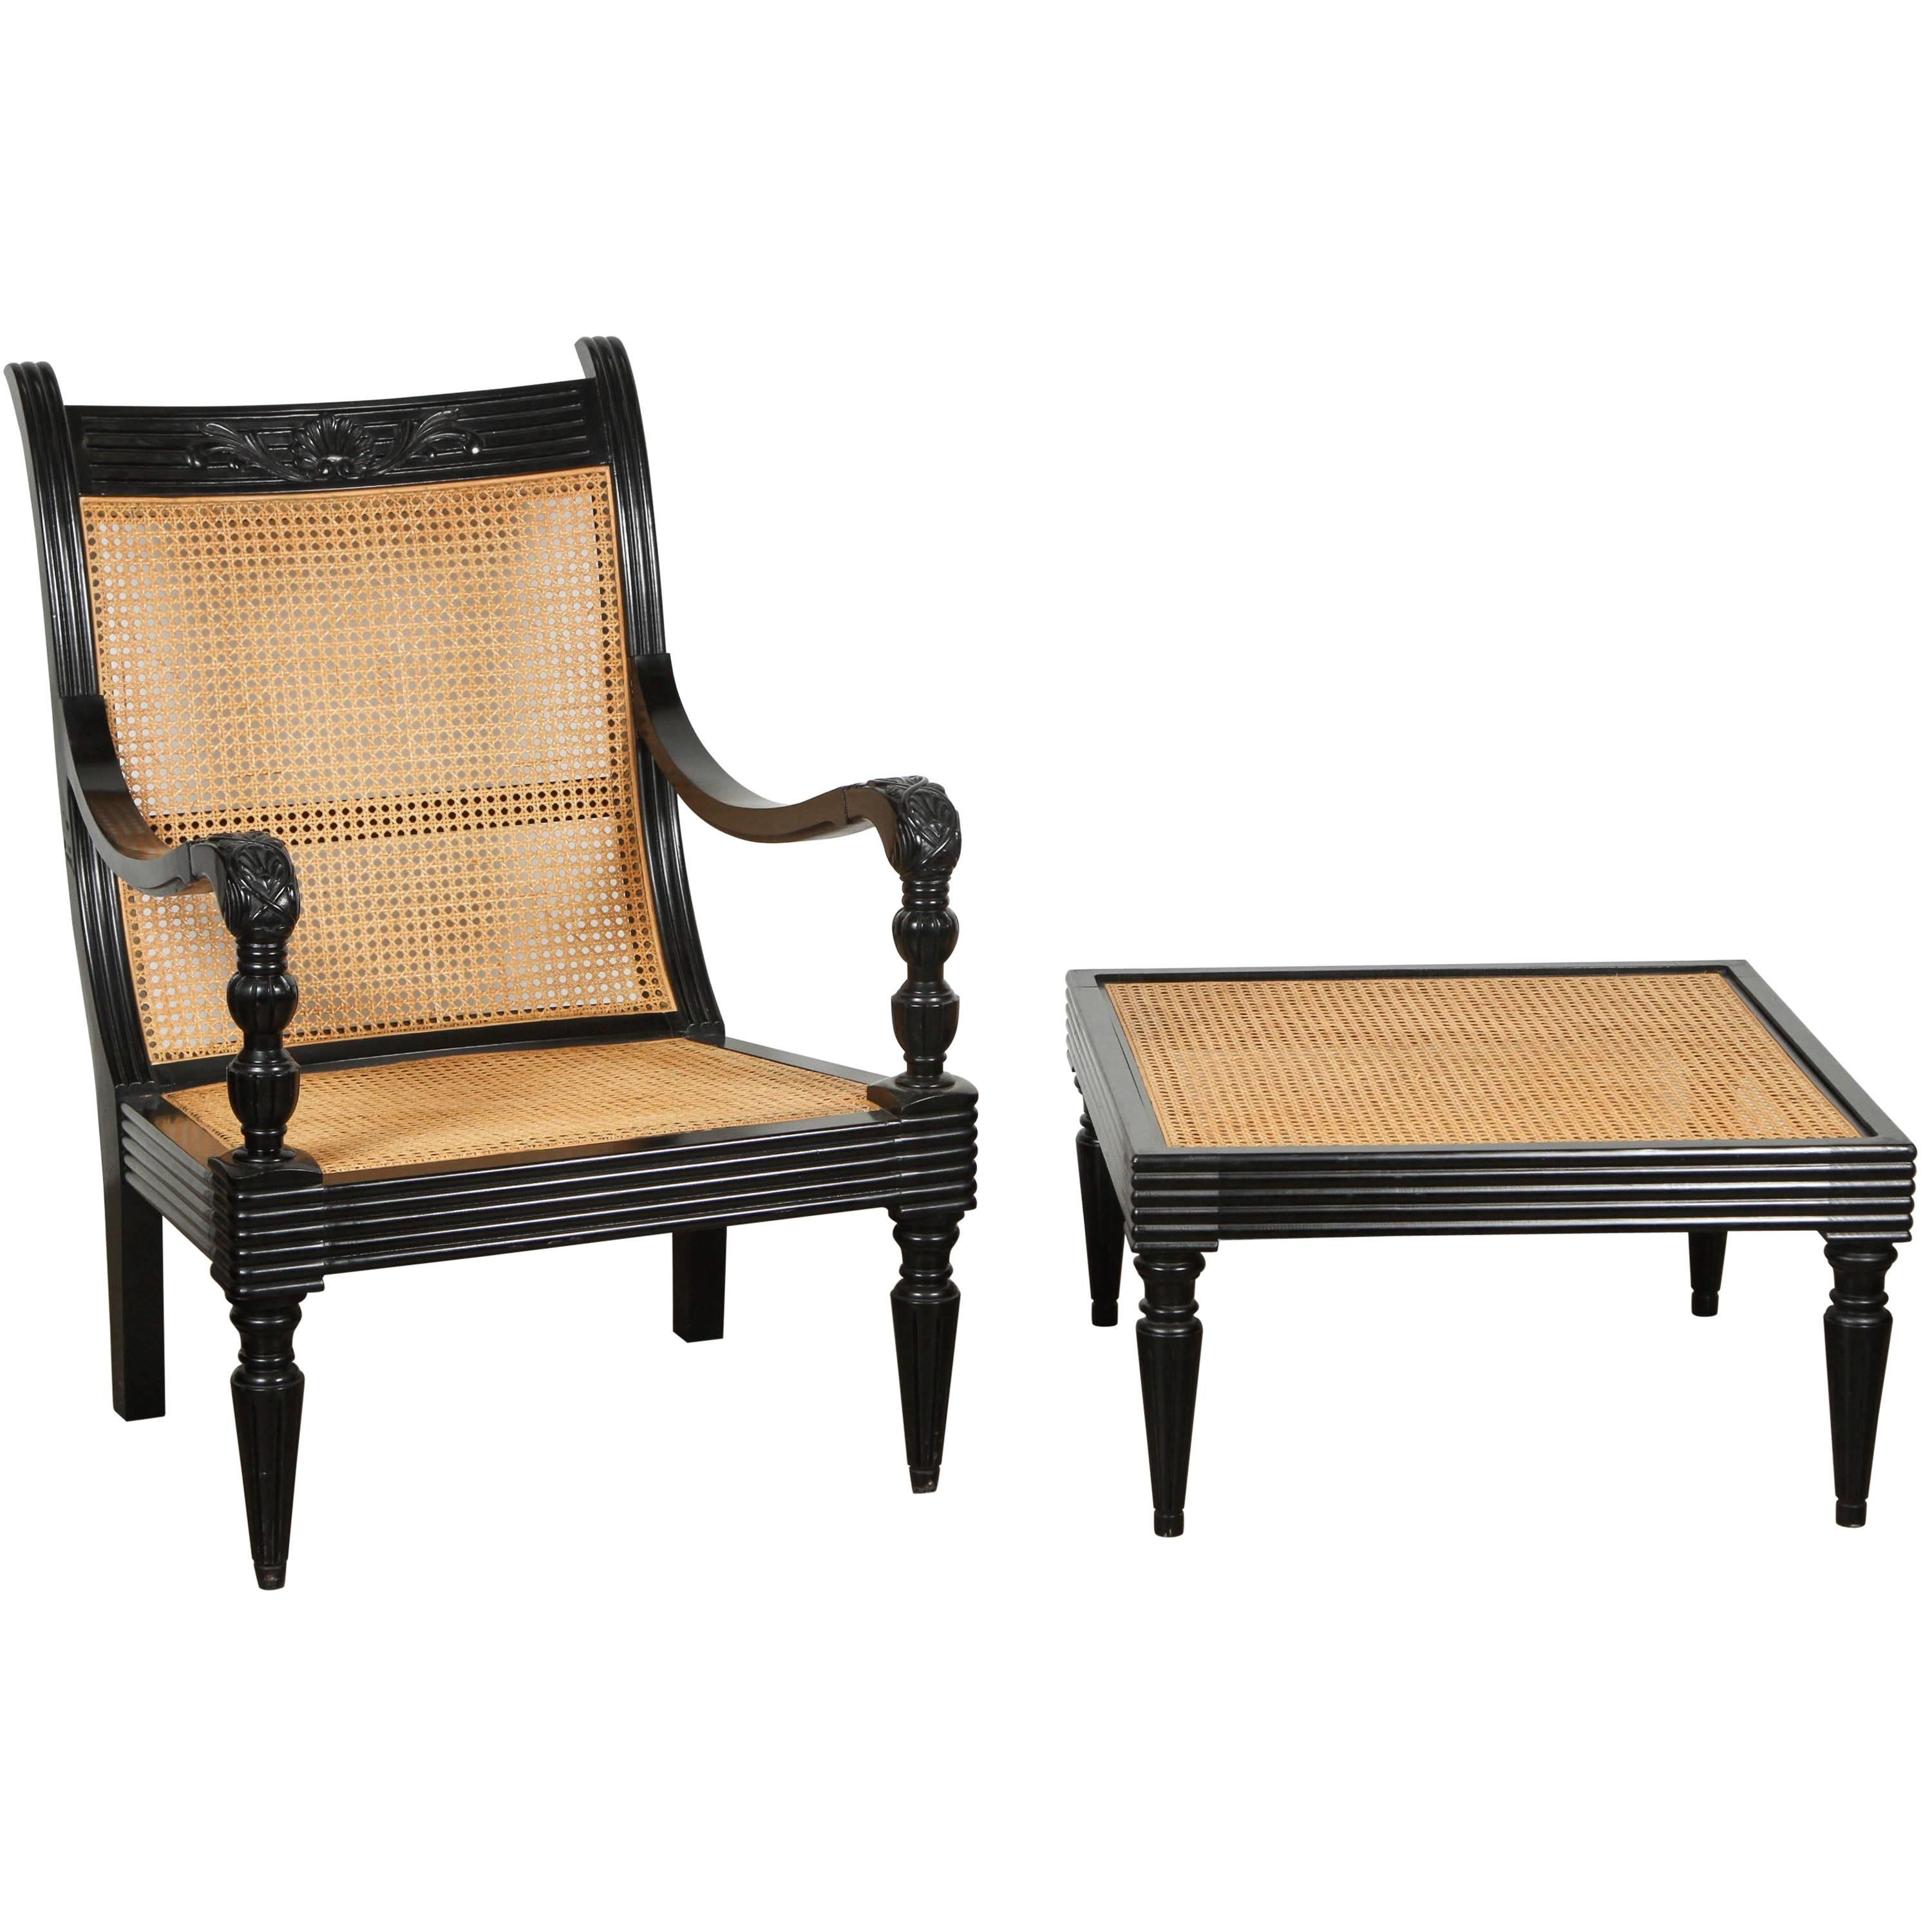 Anglo-Indian Ebonized Armchair and Ottoman